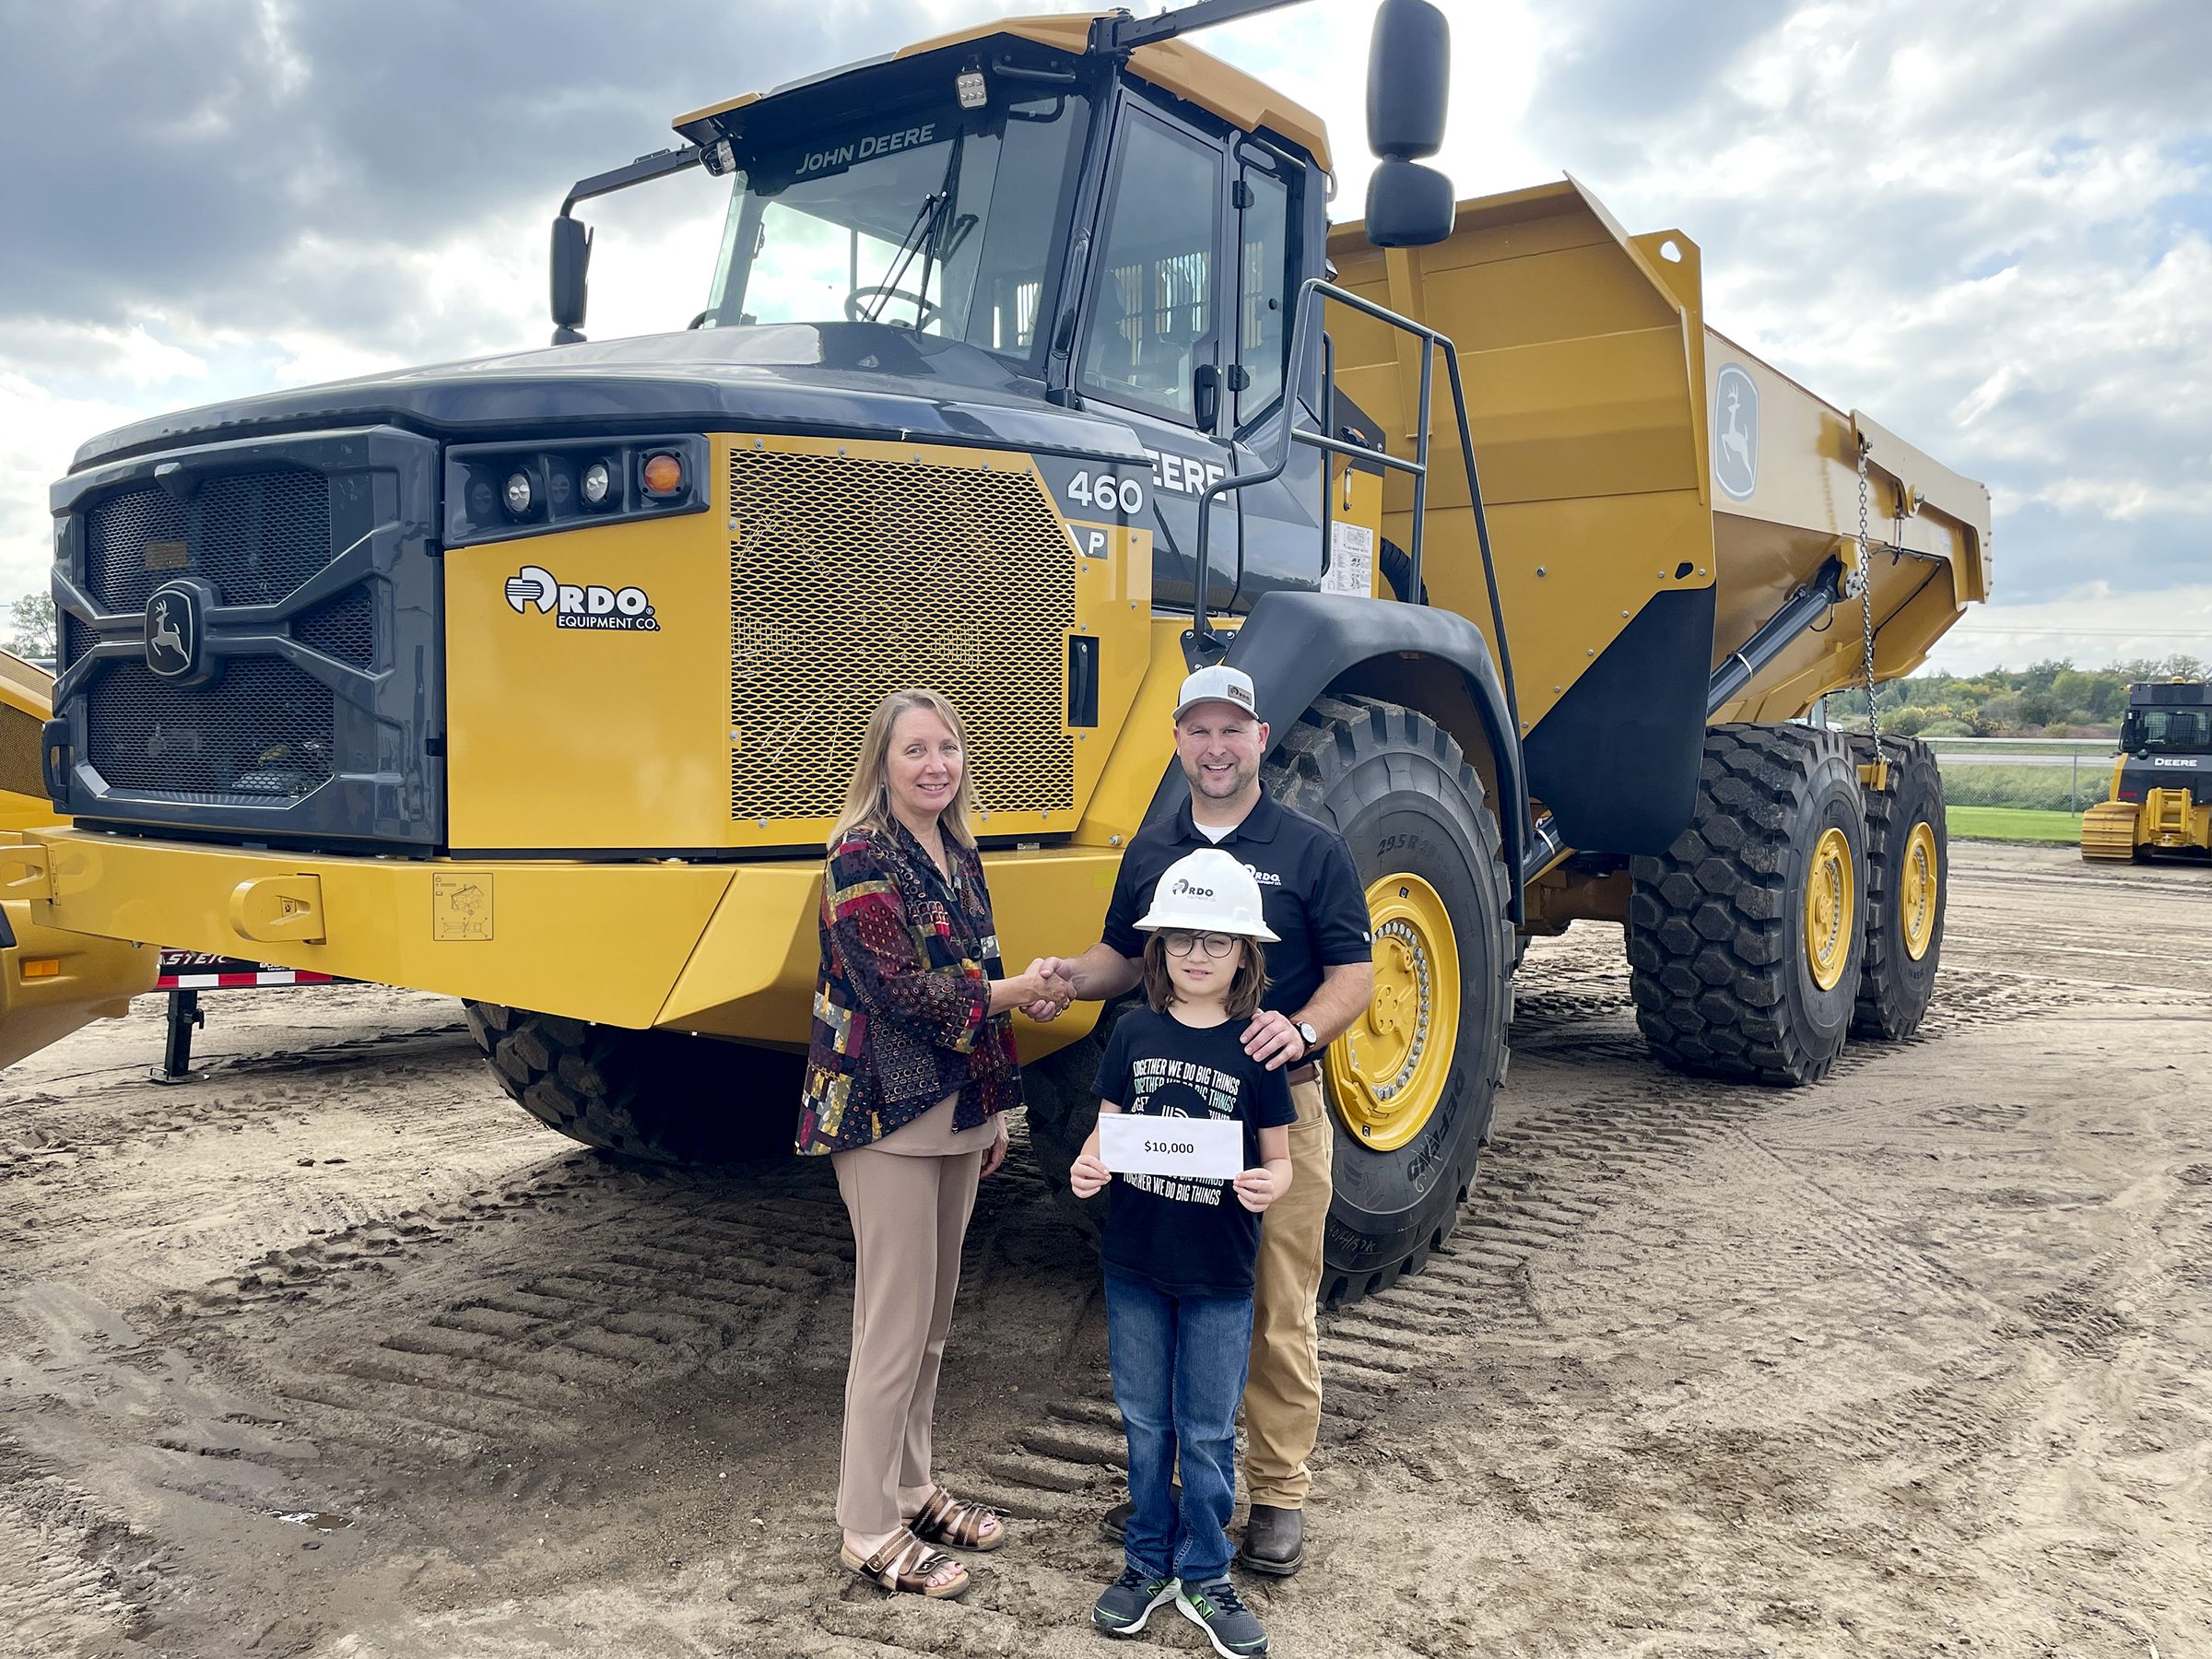 Jackie Johnson poses with Big and RDO Equipment Co. employee David Henkel and his Little, Alex, while accepting a check